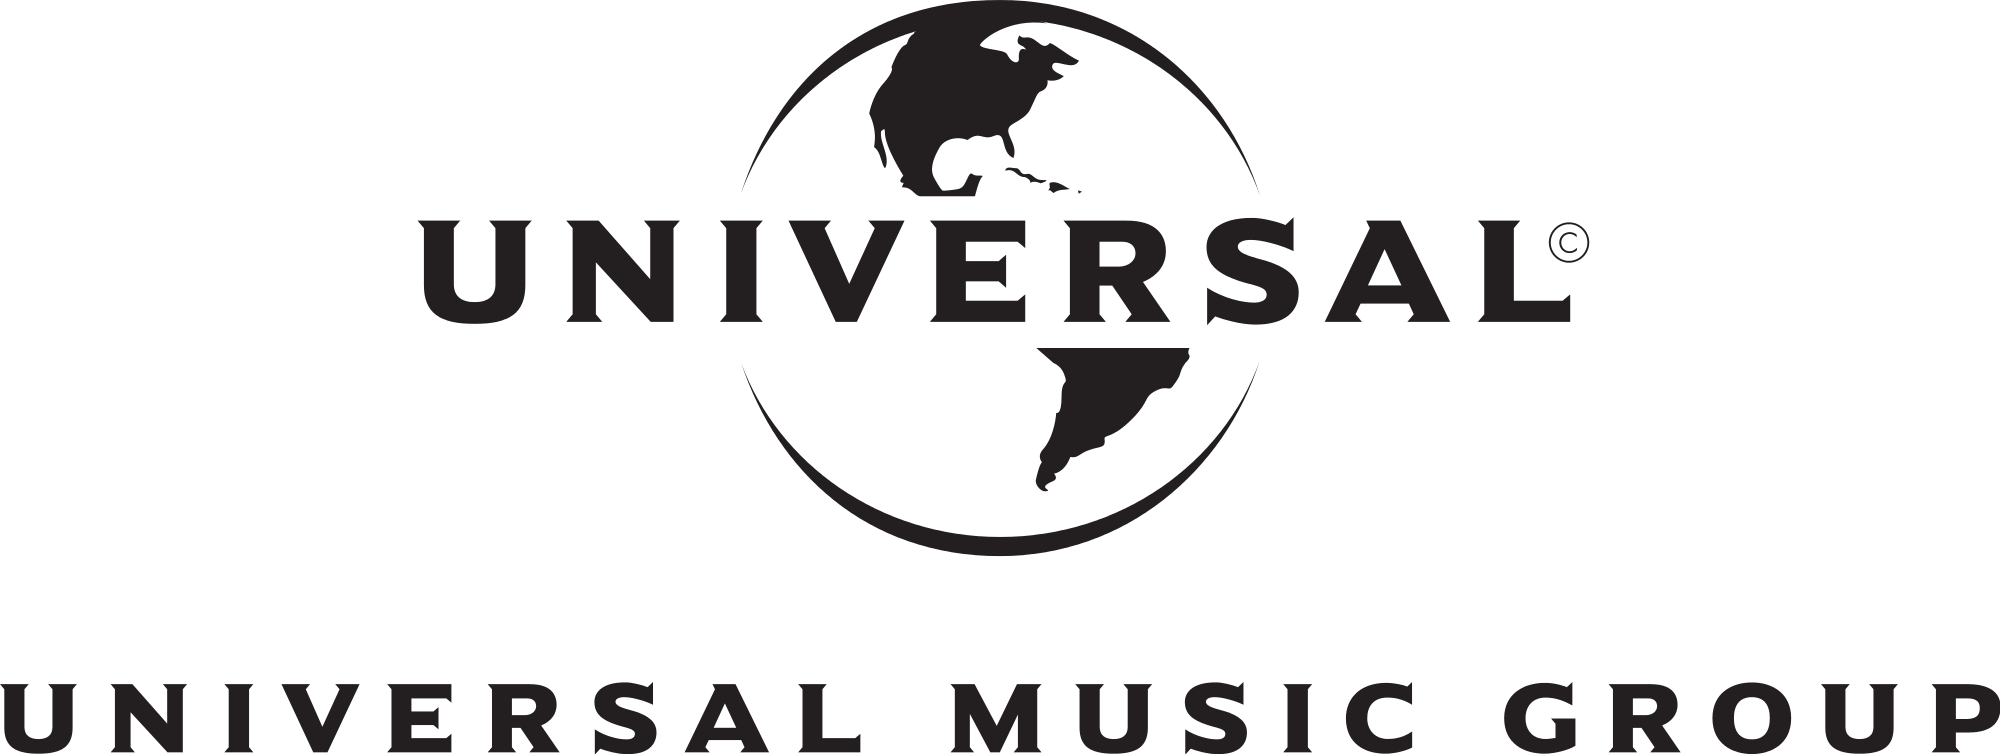 UMG Logo - Universal Music Group, the world's leading music company | Home Page ...